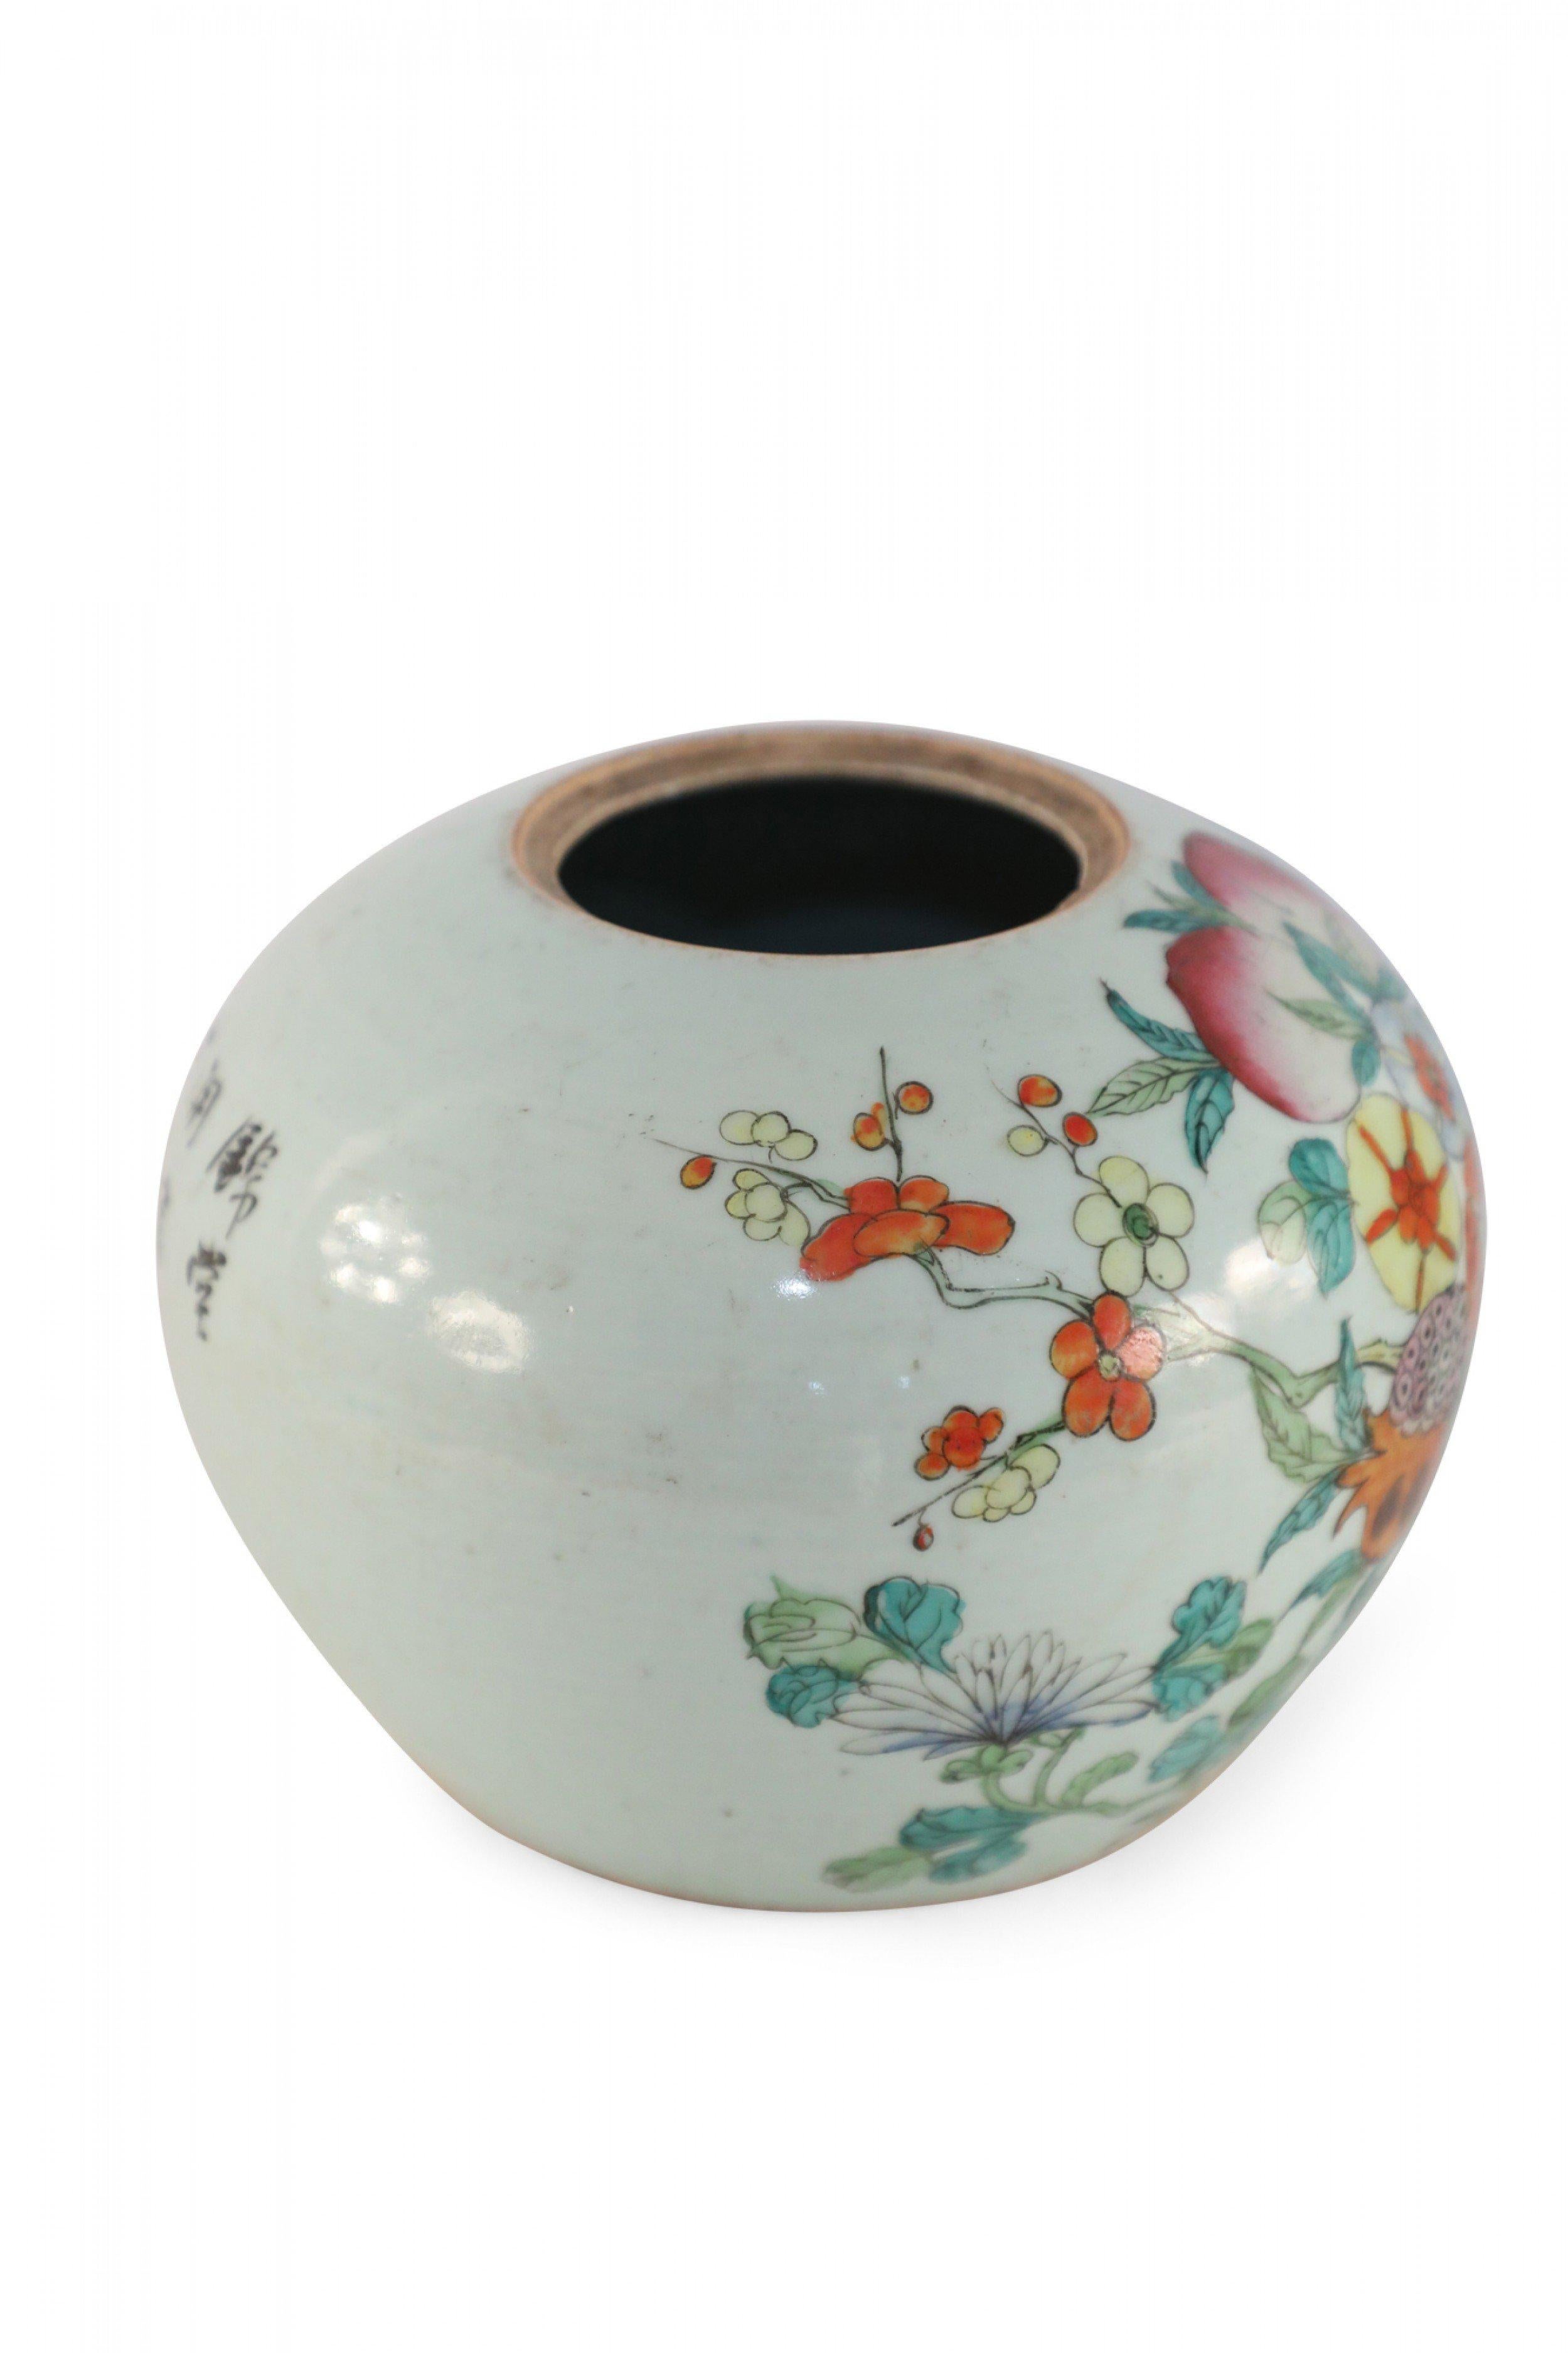 Chinese White and Floral Rounded Porcelain Watermelon Jar For Sale 4